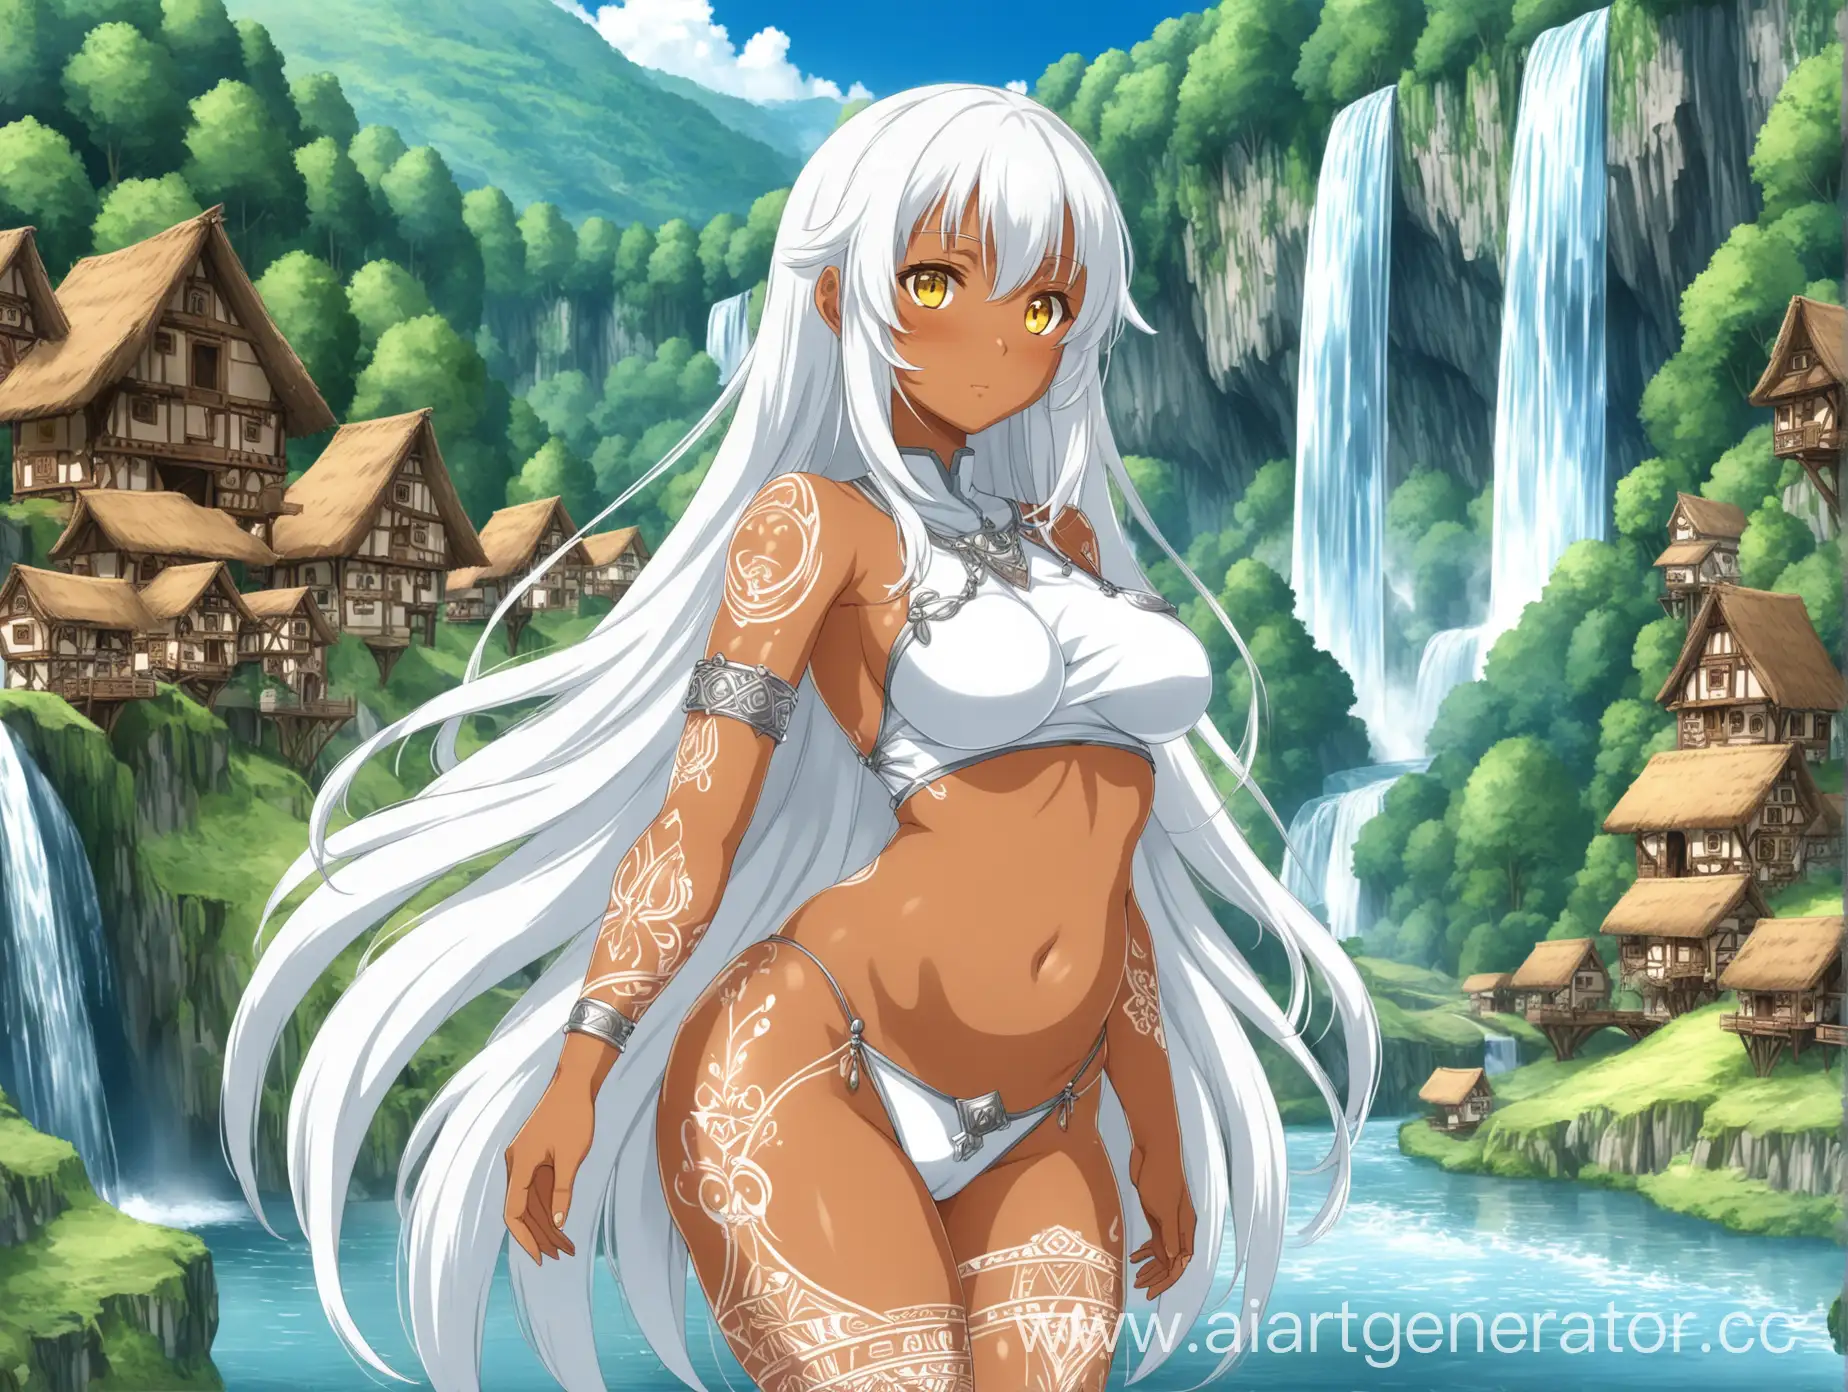 Tanned-Anime-Girl-with-White-Hair-by-River-and-Forest-Village